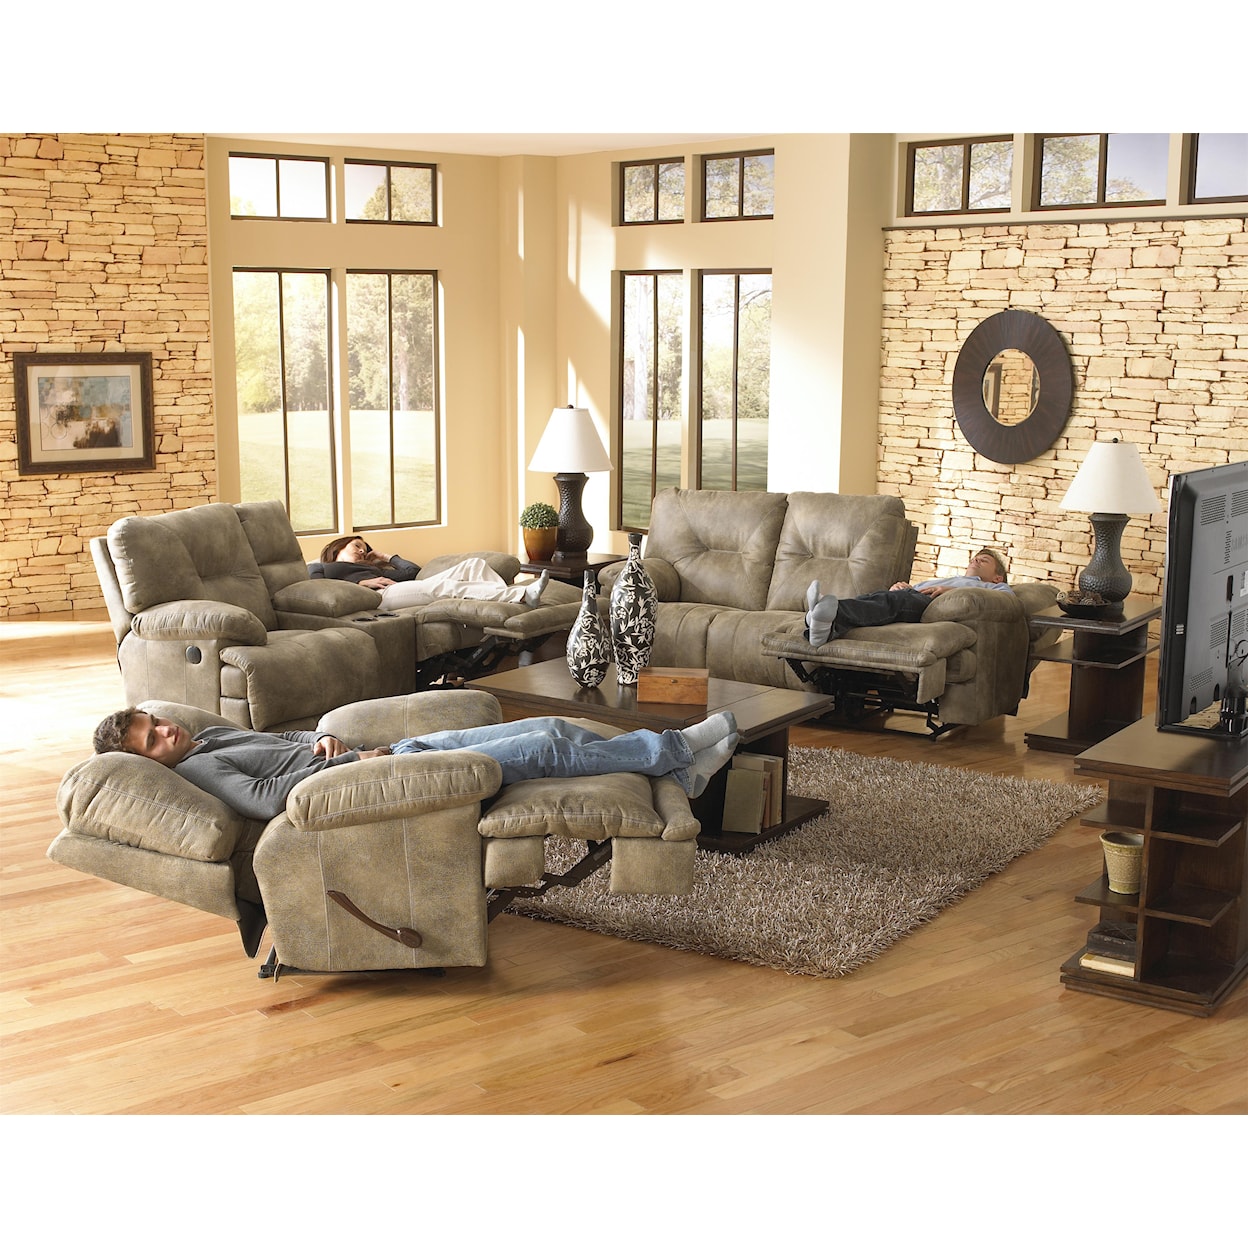 Catnapper 438 Voyager Reclining Living Room Group